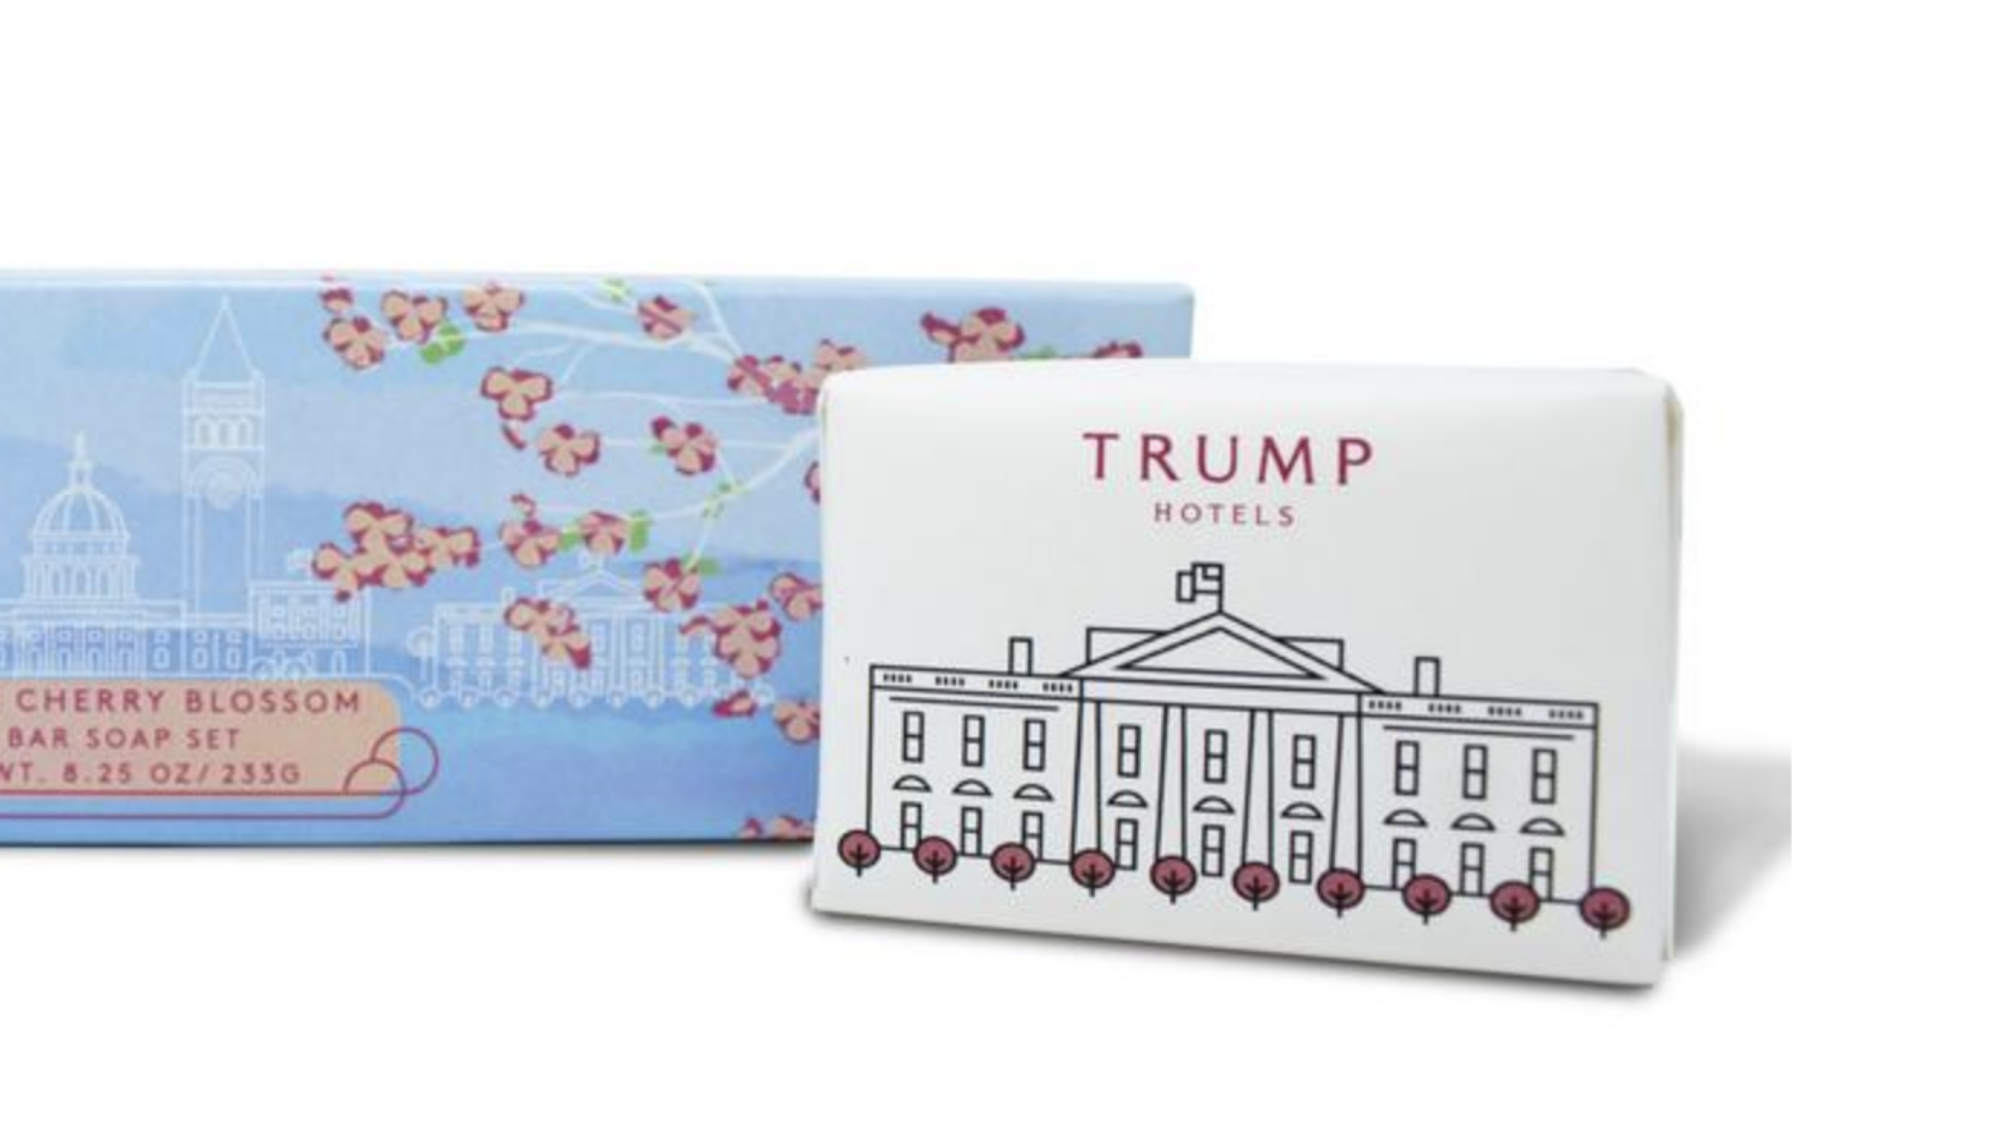 The "Cherry Blossom Bar Soap Set" being sold by the Trump Organization. TrumpStore.com/Wayback Machine